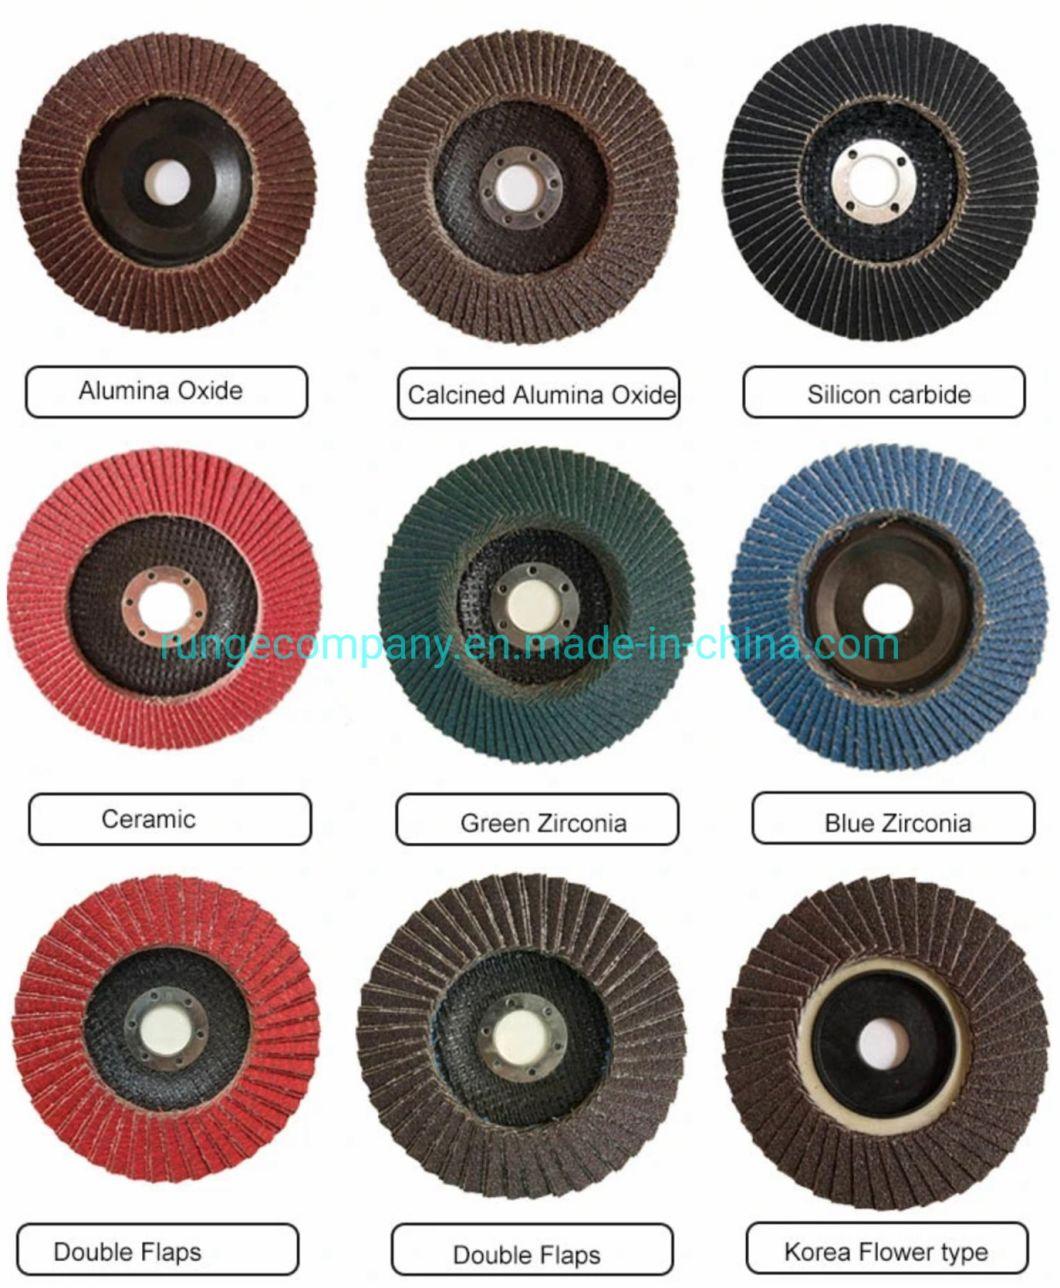 Power Electric Tools Accessories Cutting Discs Cut off Wheels 4 Inch for All Ferrous Metals and Stainless Steel